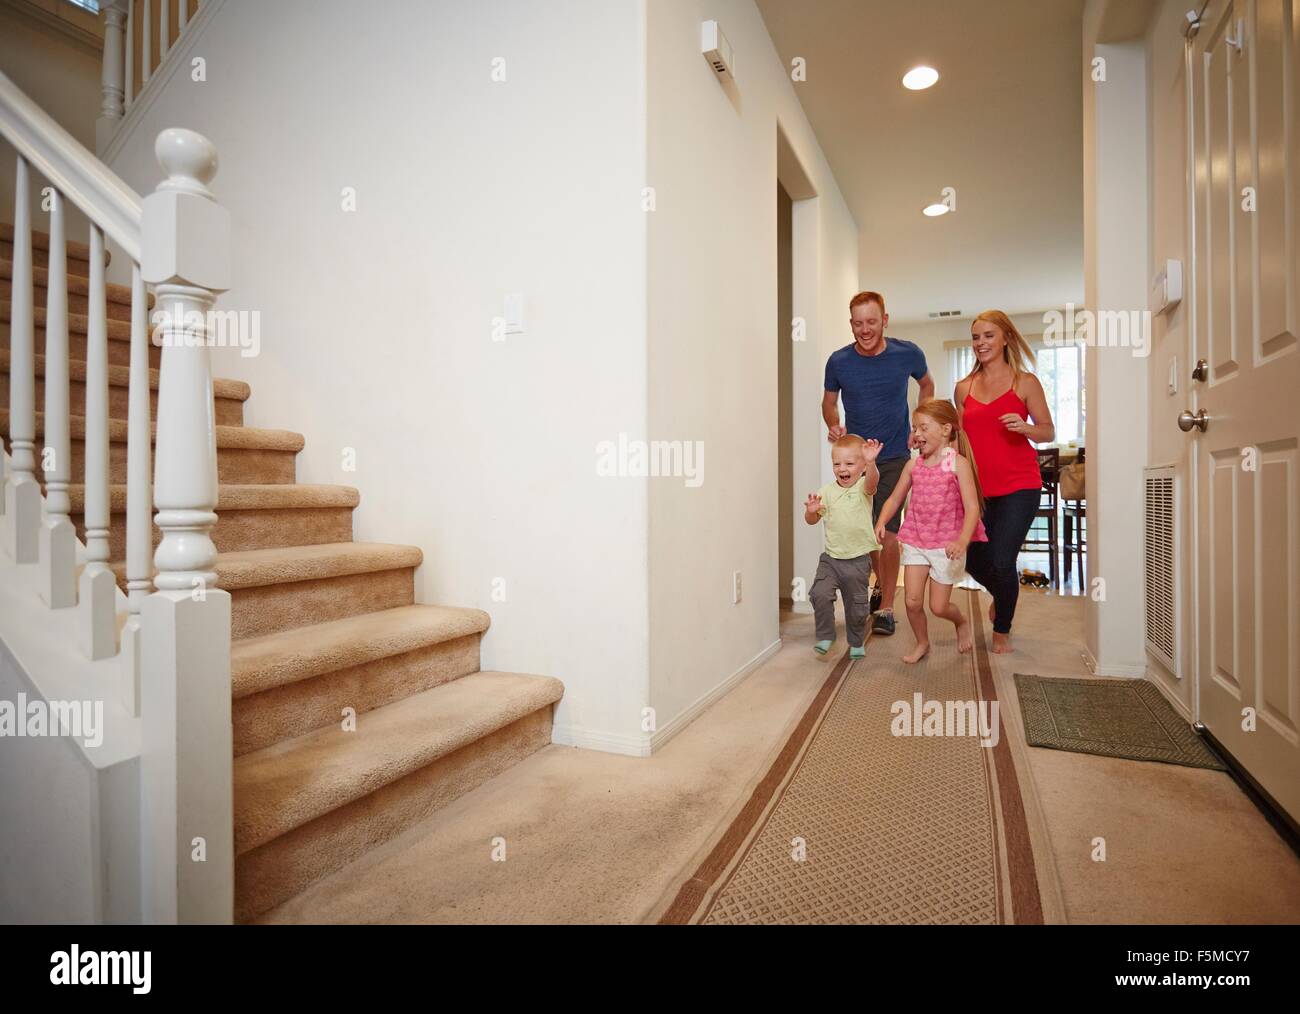 Family running in hallway at home Stock Photo